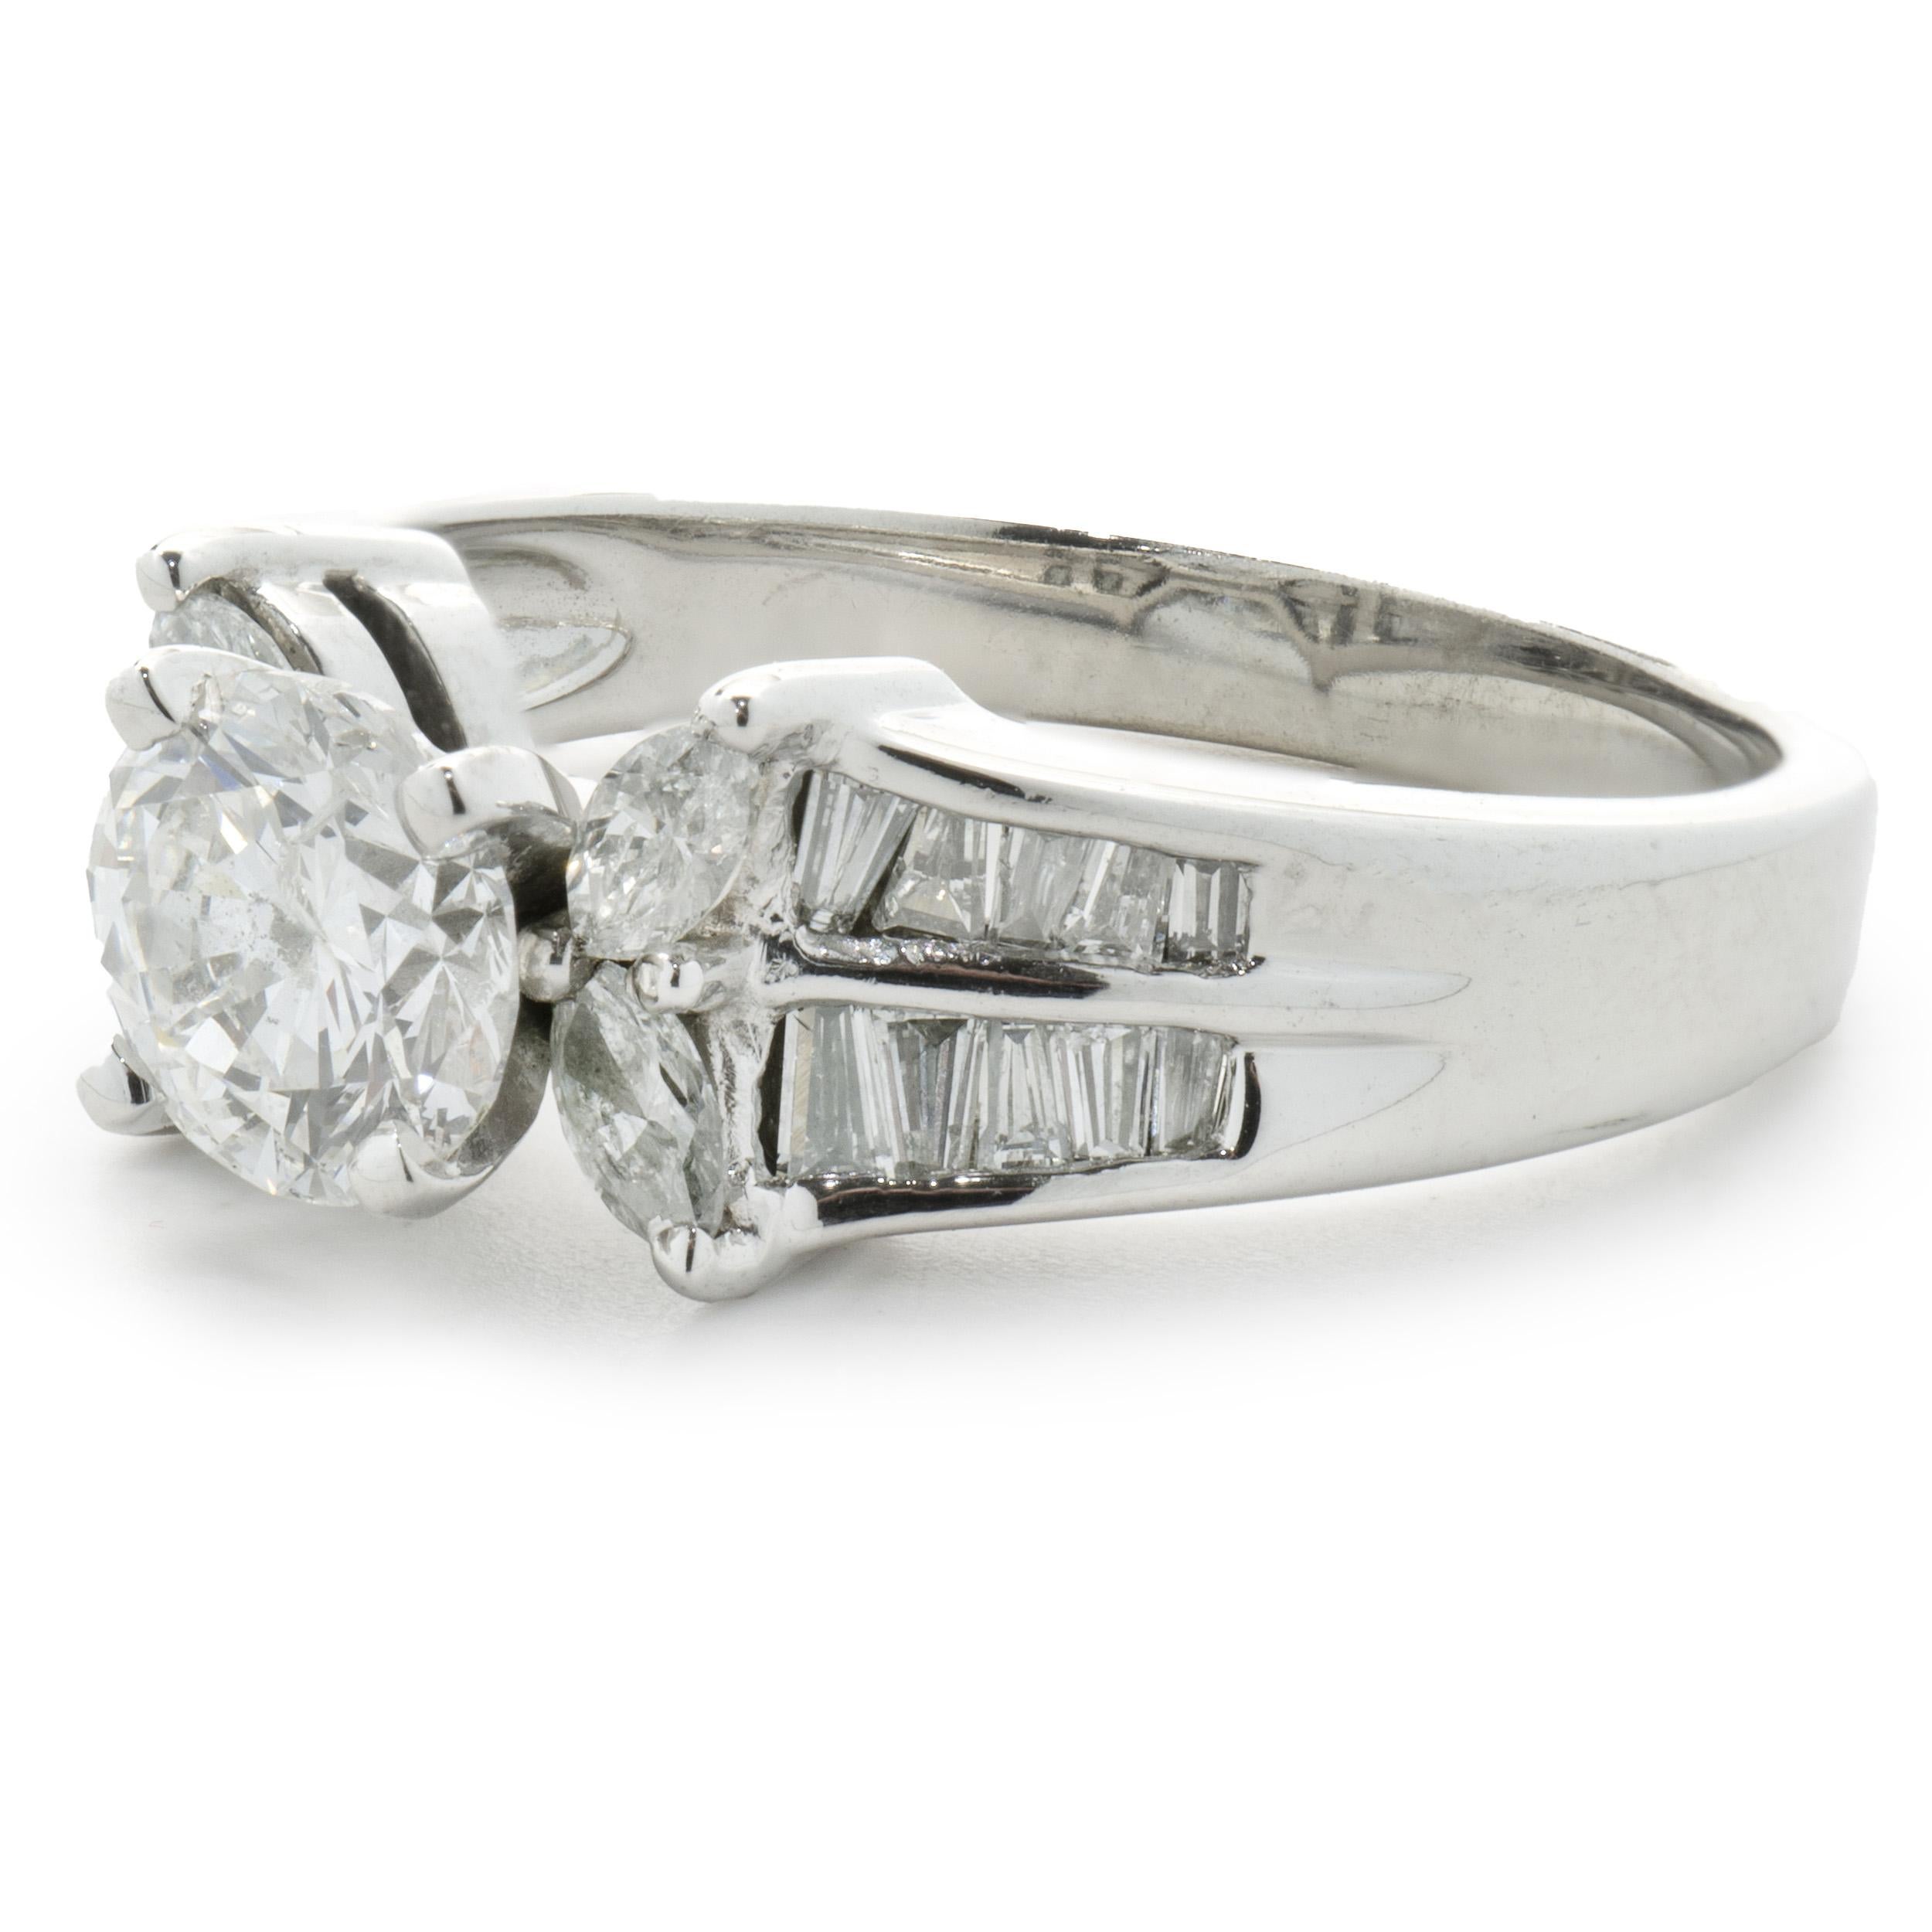 Designer: Custom
Material: 14K white gold
Diamond: 1 round brilliant cut = 0.93ct
Color: I
Clarity: I1
Diamond: 26 marquise & baguette cut = 0.75cttw
Color: H
Clarity: SI1
Dimensions: ring top measures 8mm wide
Ring Size: 8 (complimentary sizing